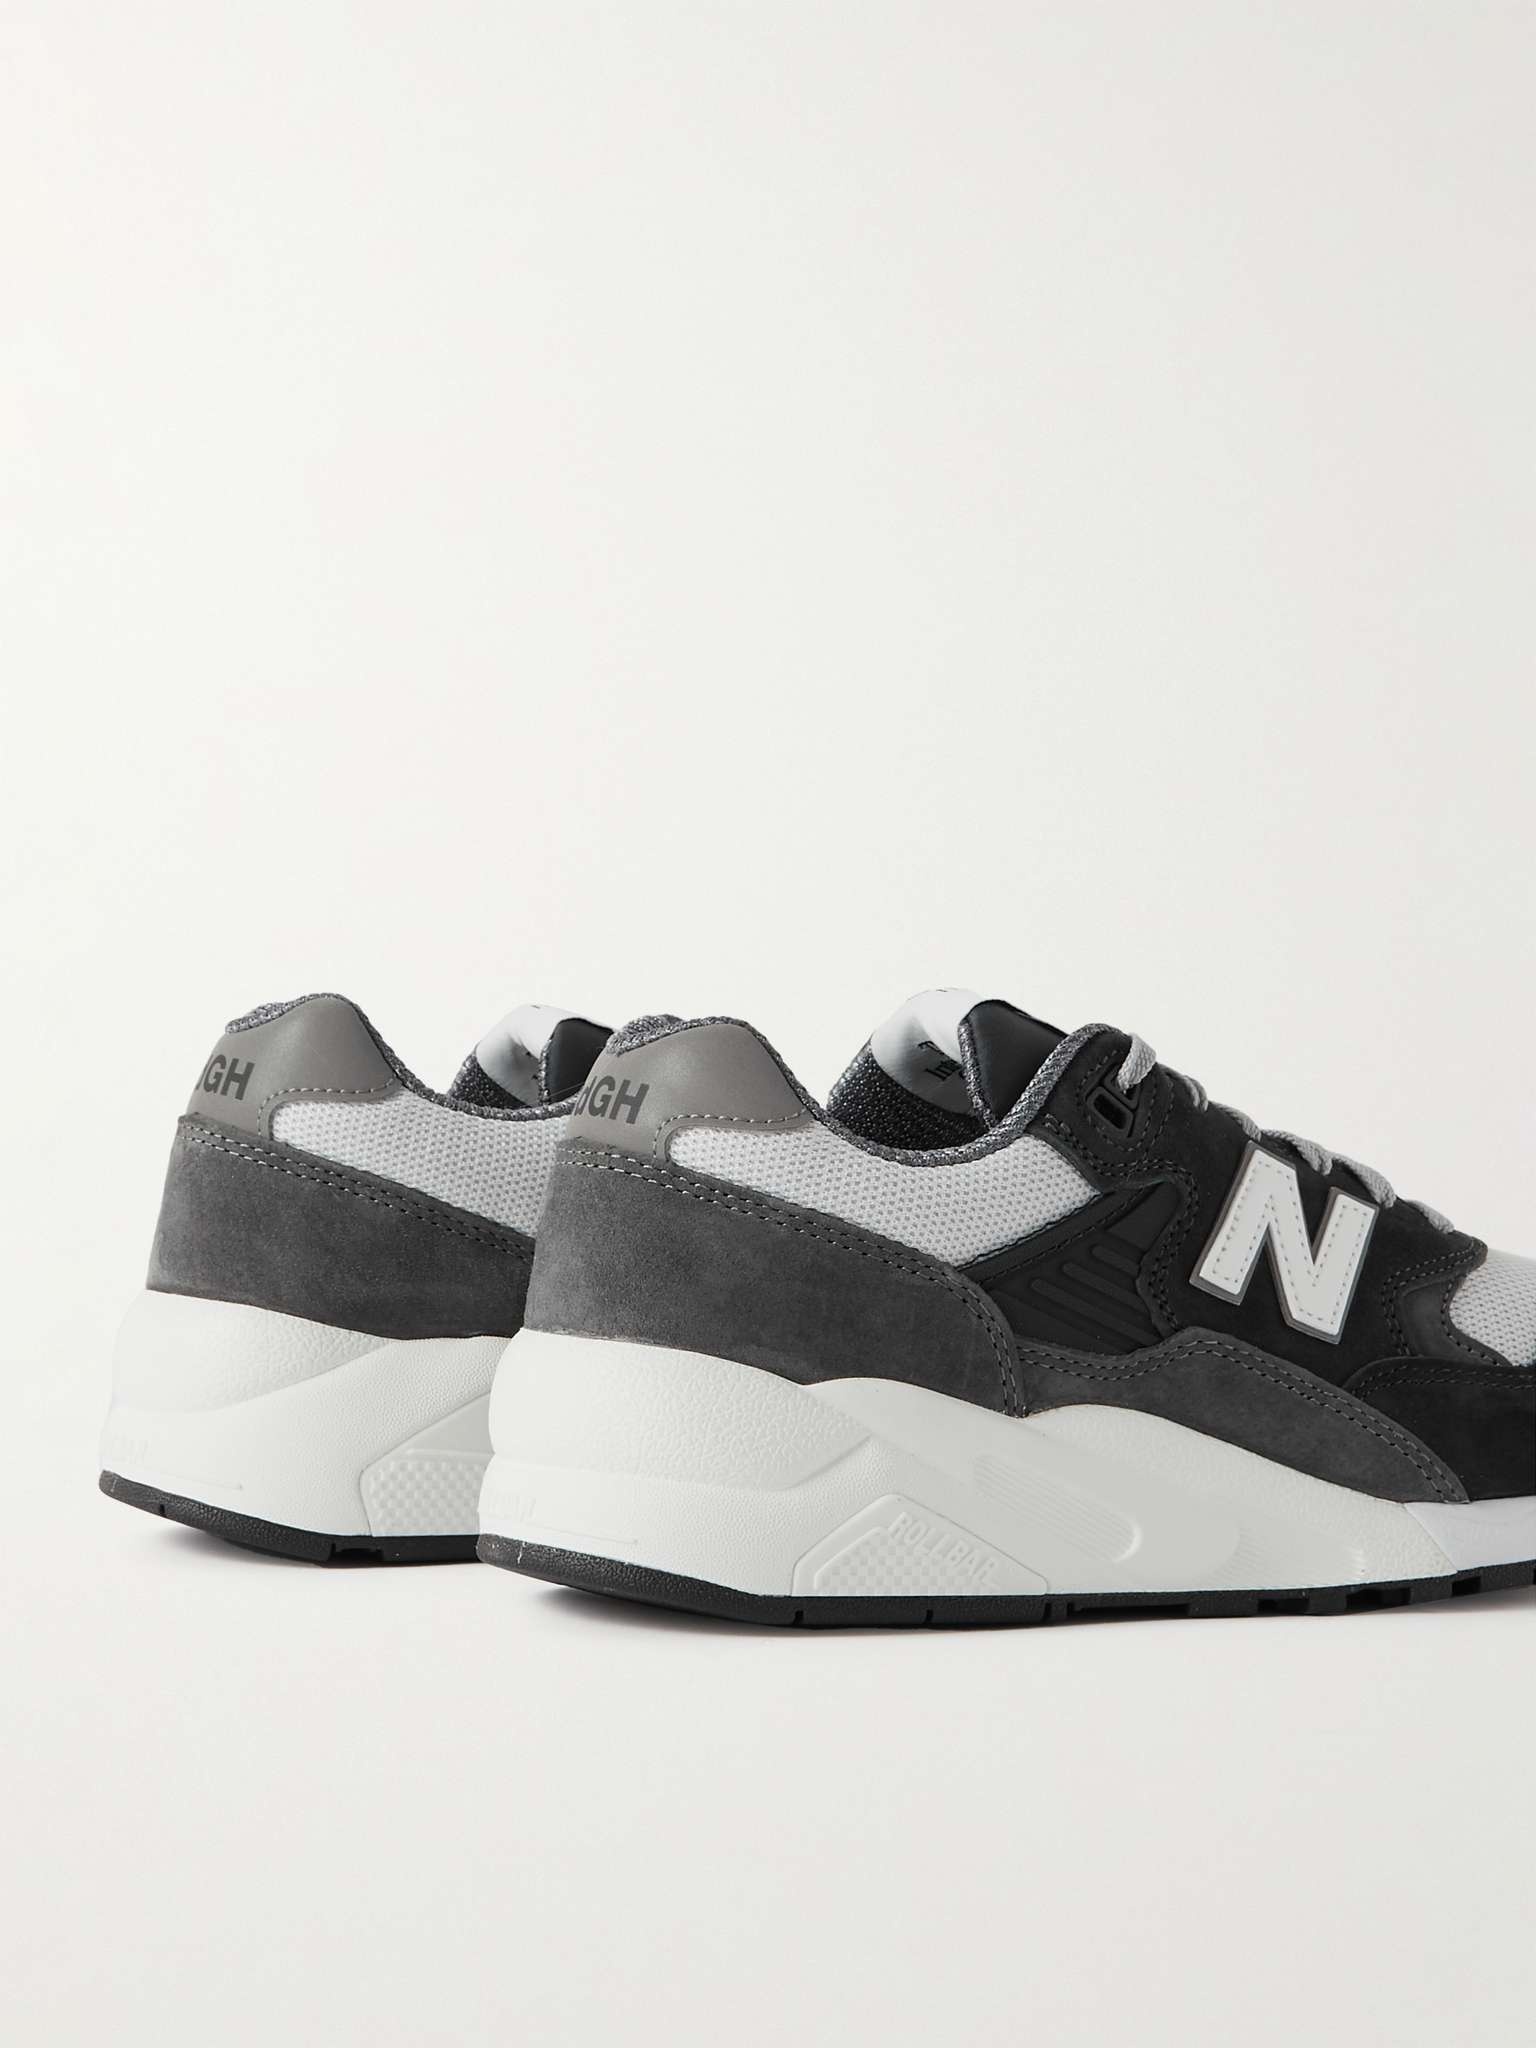 + New Balance 580 Suede and Mesh Sneakers - 5